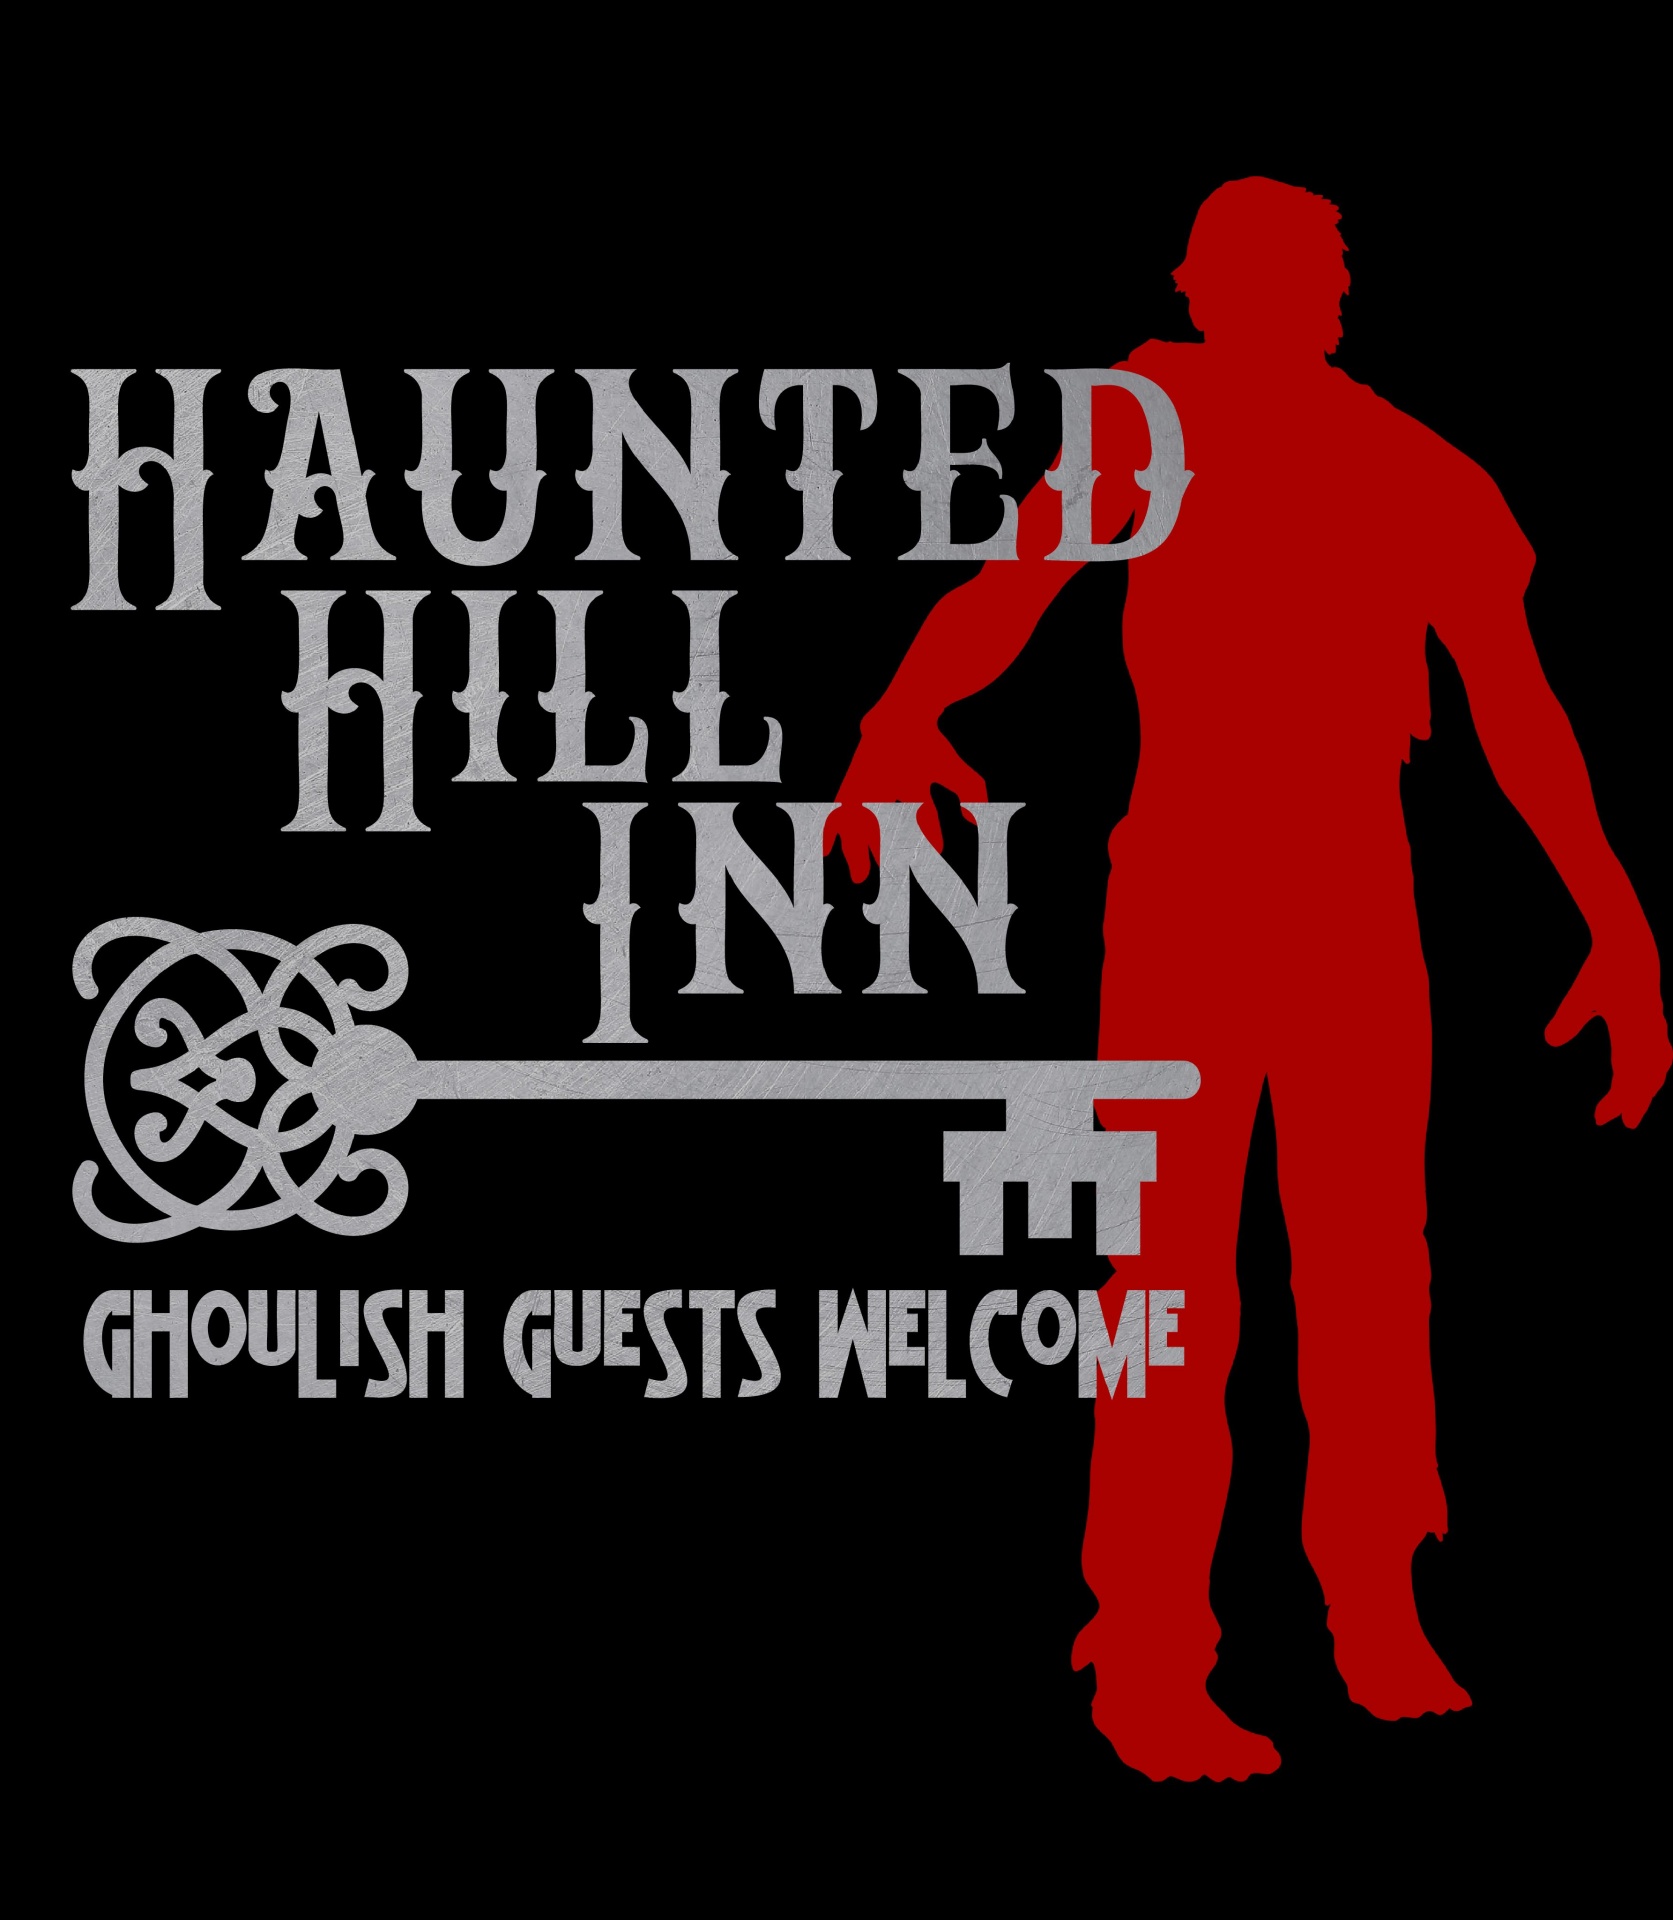 poster for Haunted Hill Inn where Ghoulish Guests are Welcome - including zombies